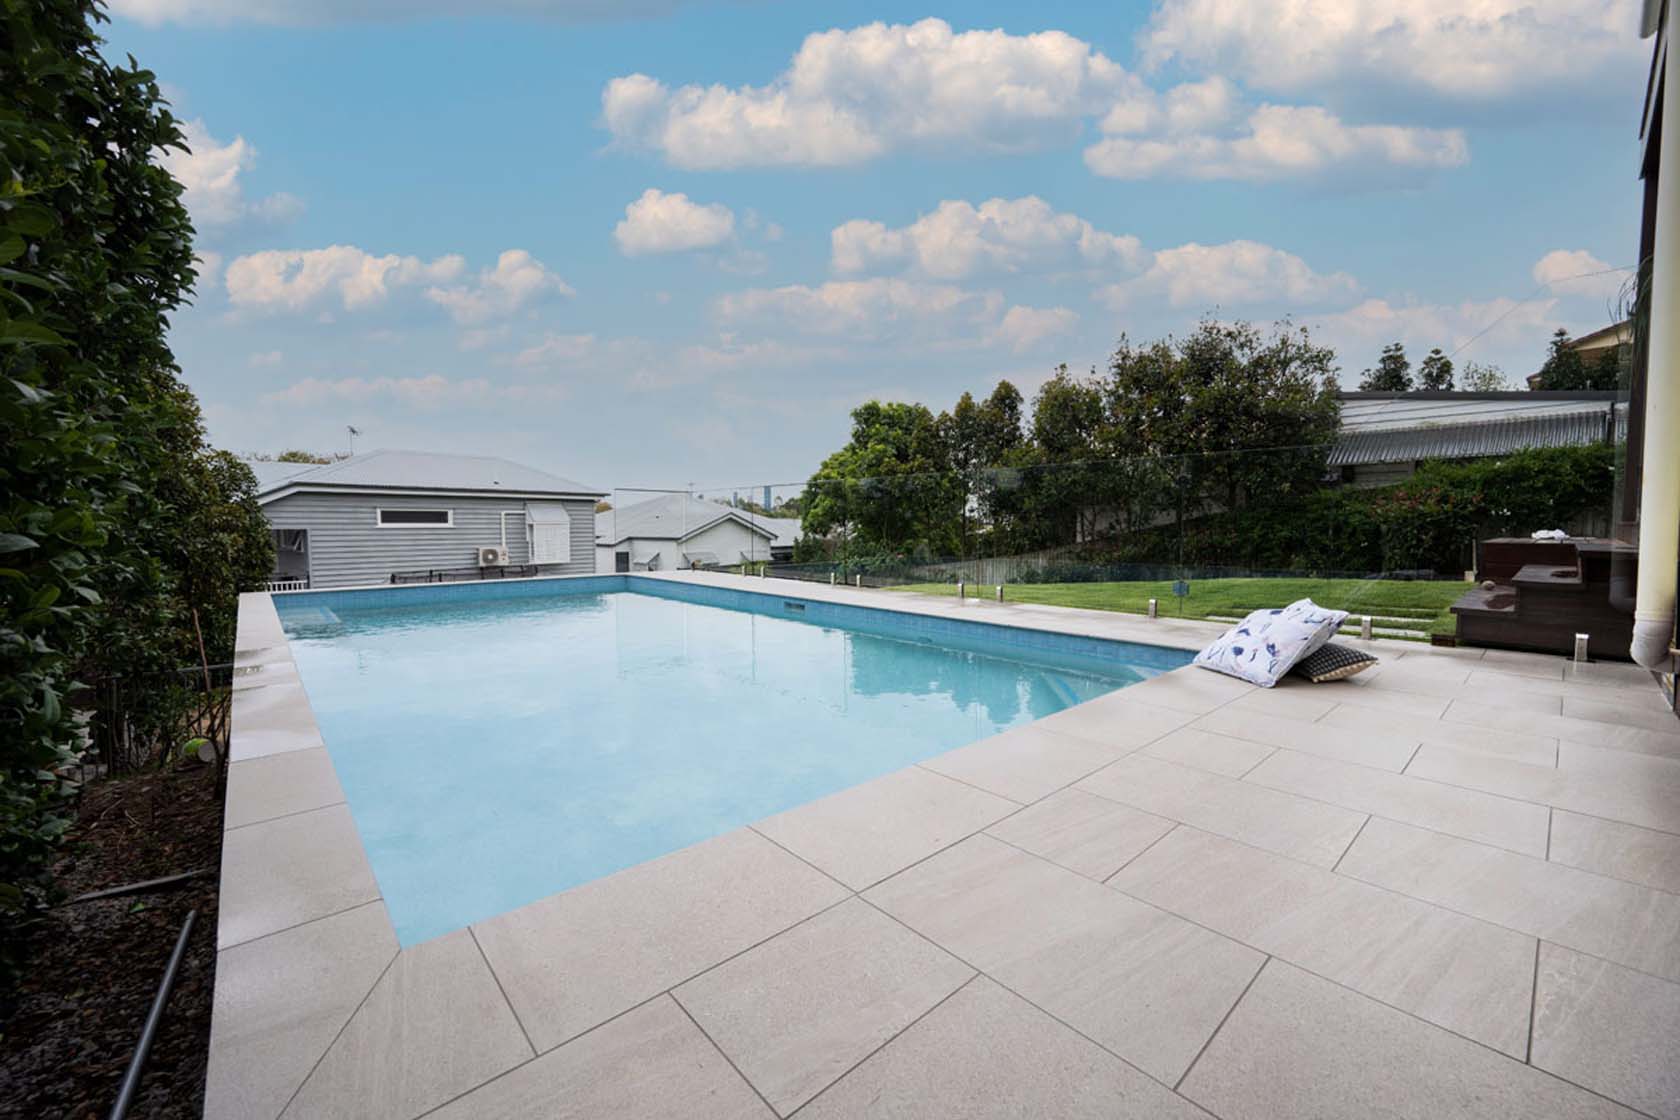 Mercury Porcelain pool coping and surrounds with Currumbin Ceramic waterline and step marker tiles